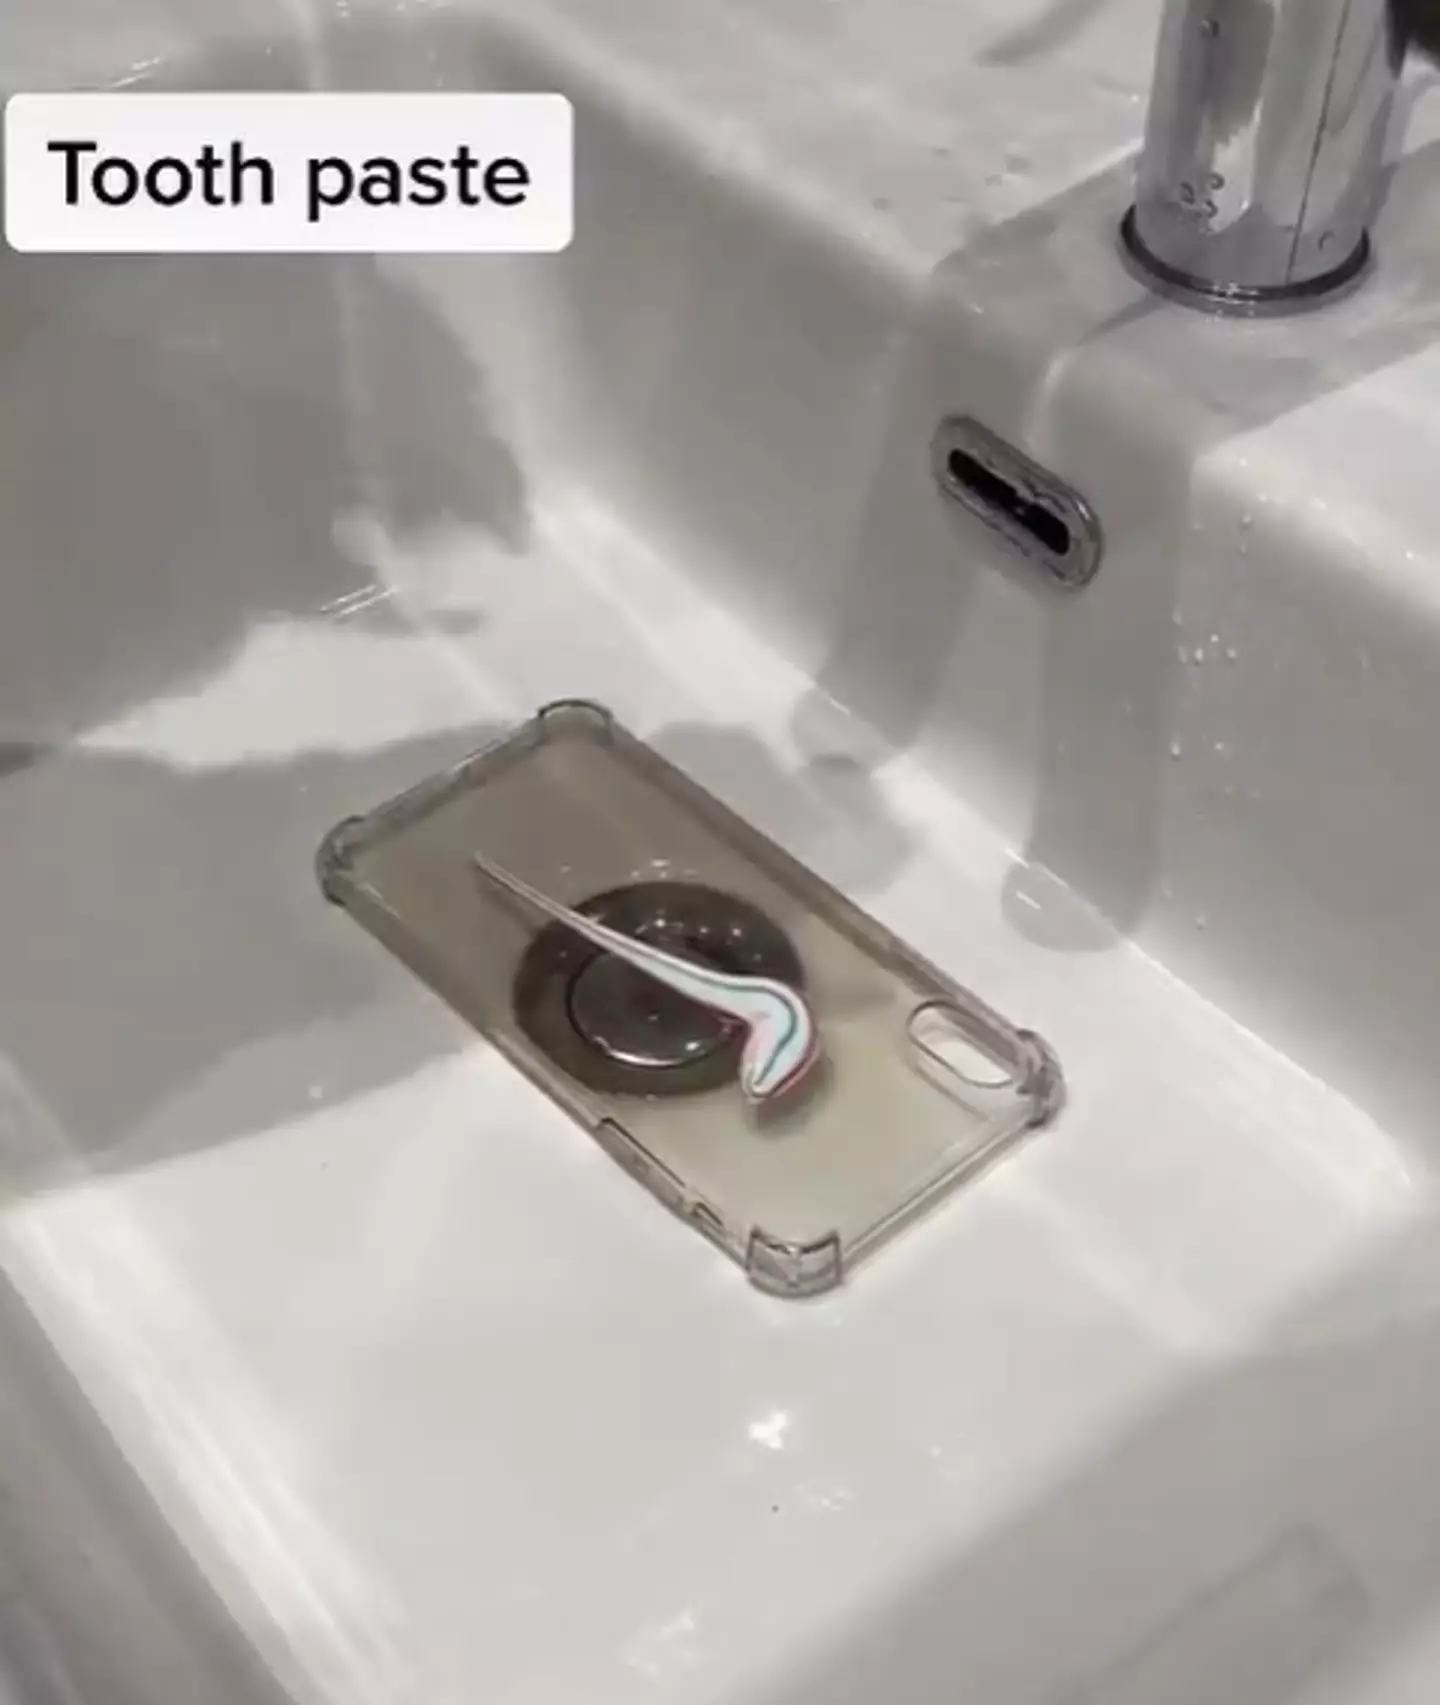 Some viewers weren't convinced by the use of toothpaste (